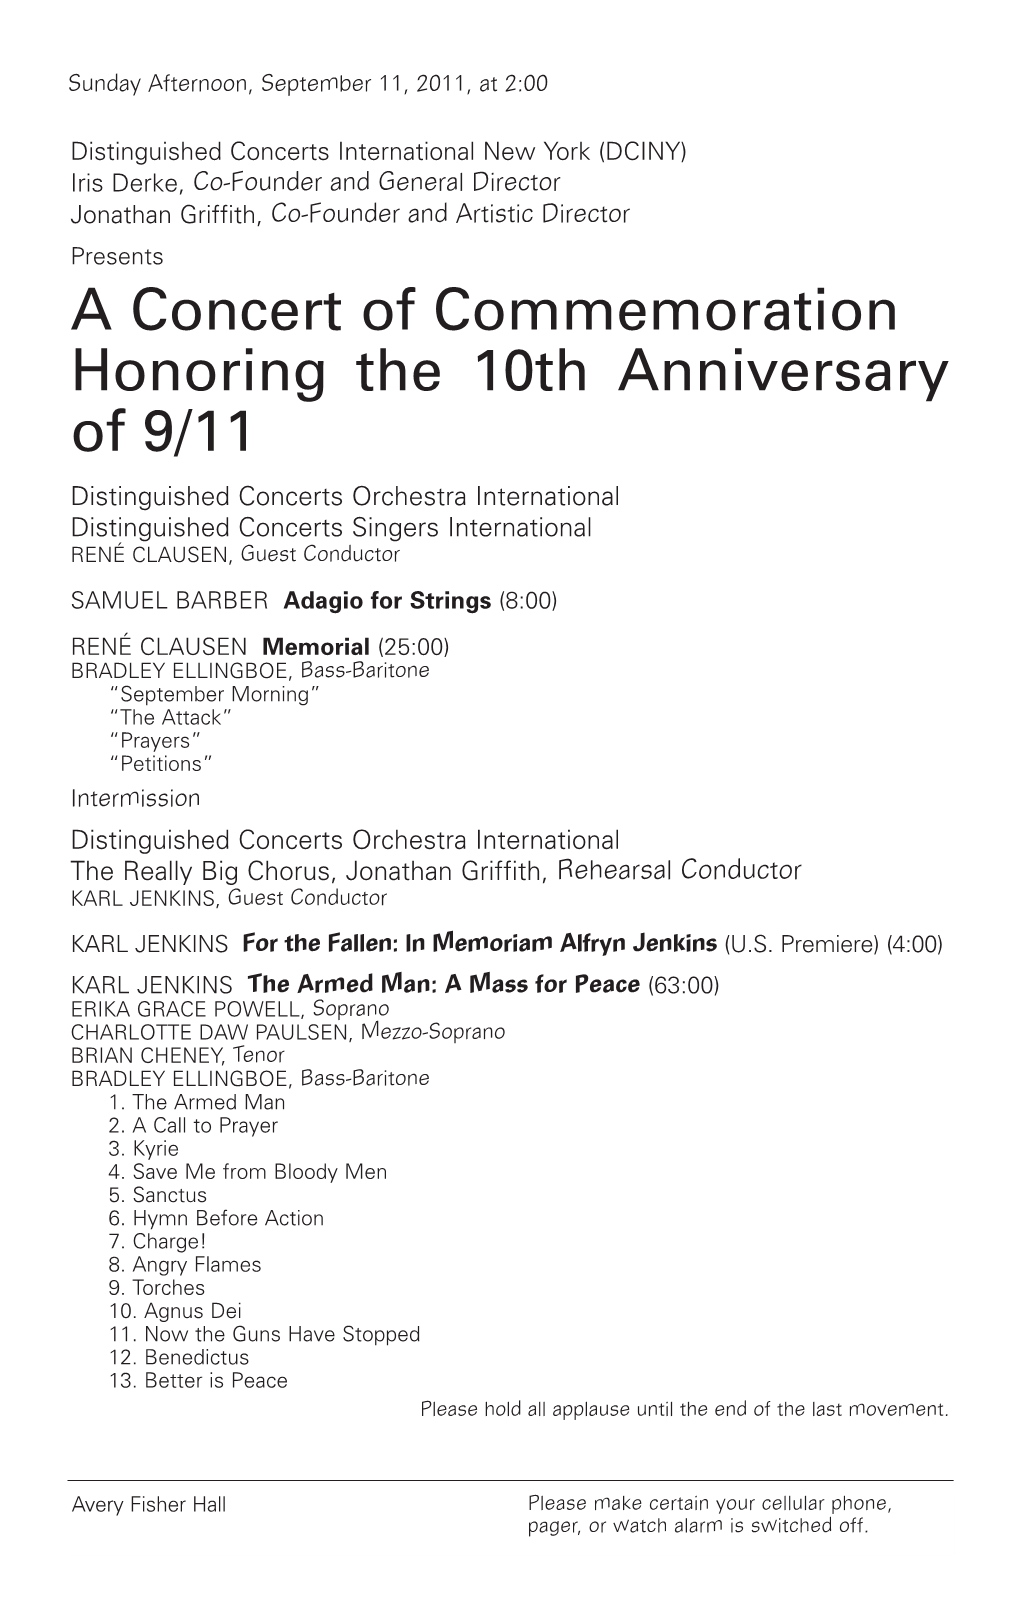 A Concert of Commemoration Honoring the 10Th Anniversary of 9/11